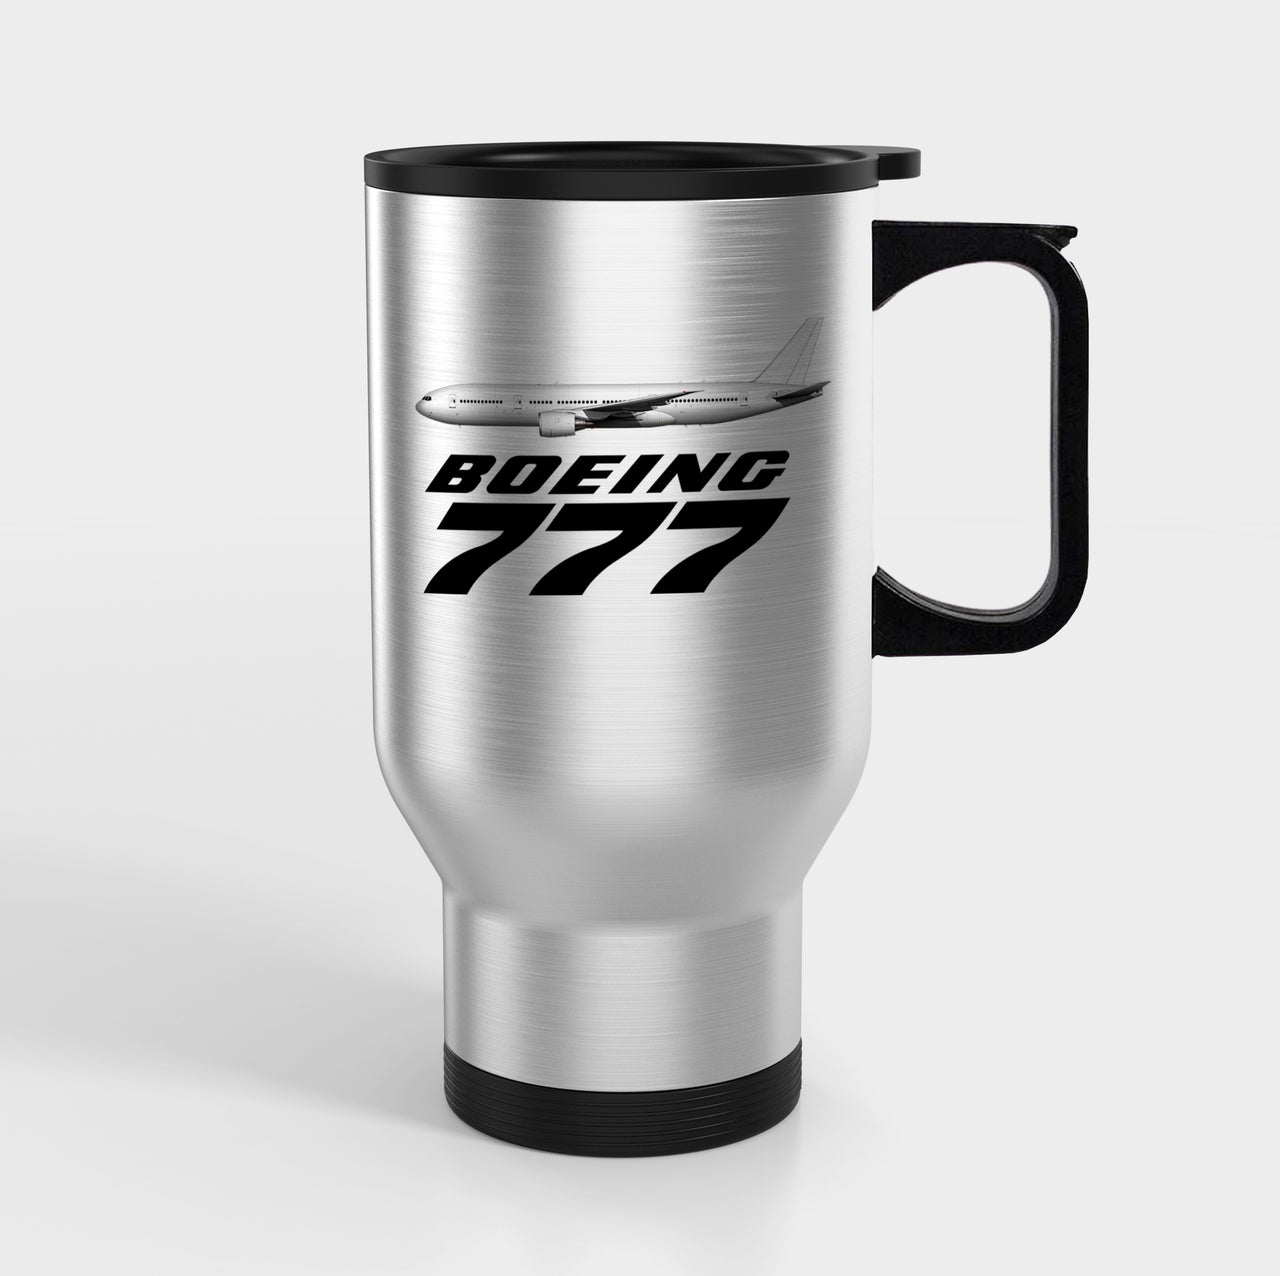 The Boeing 777 Designed Travel Mugs (With Holder)